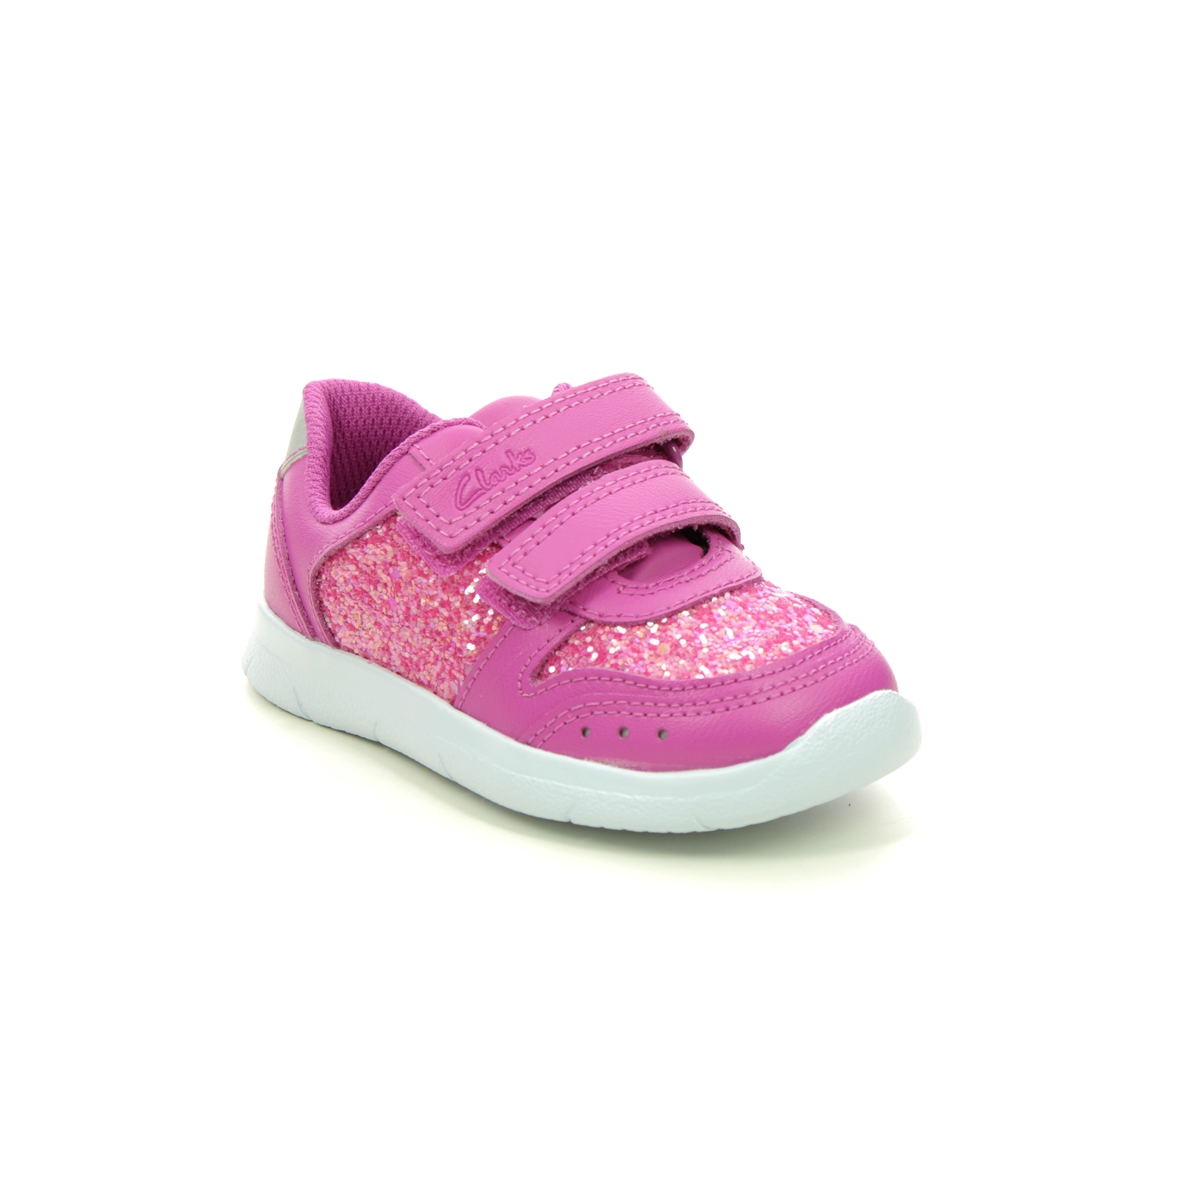 Clarks Ath Sonar T Hot Pink Kids Toddler Girls Trainers 637916F In Size 4.5 In Plain Hot Pink F Width Fitting Regular Fit